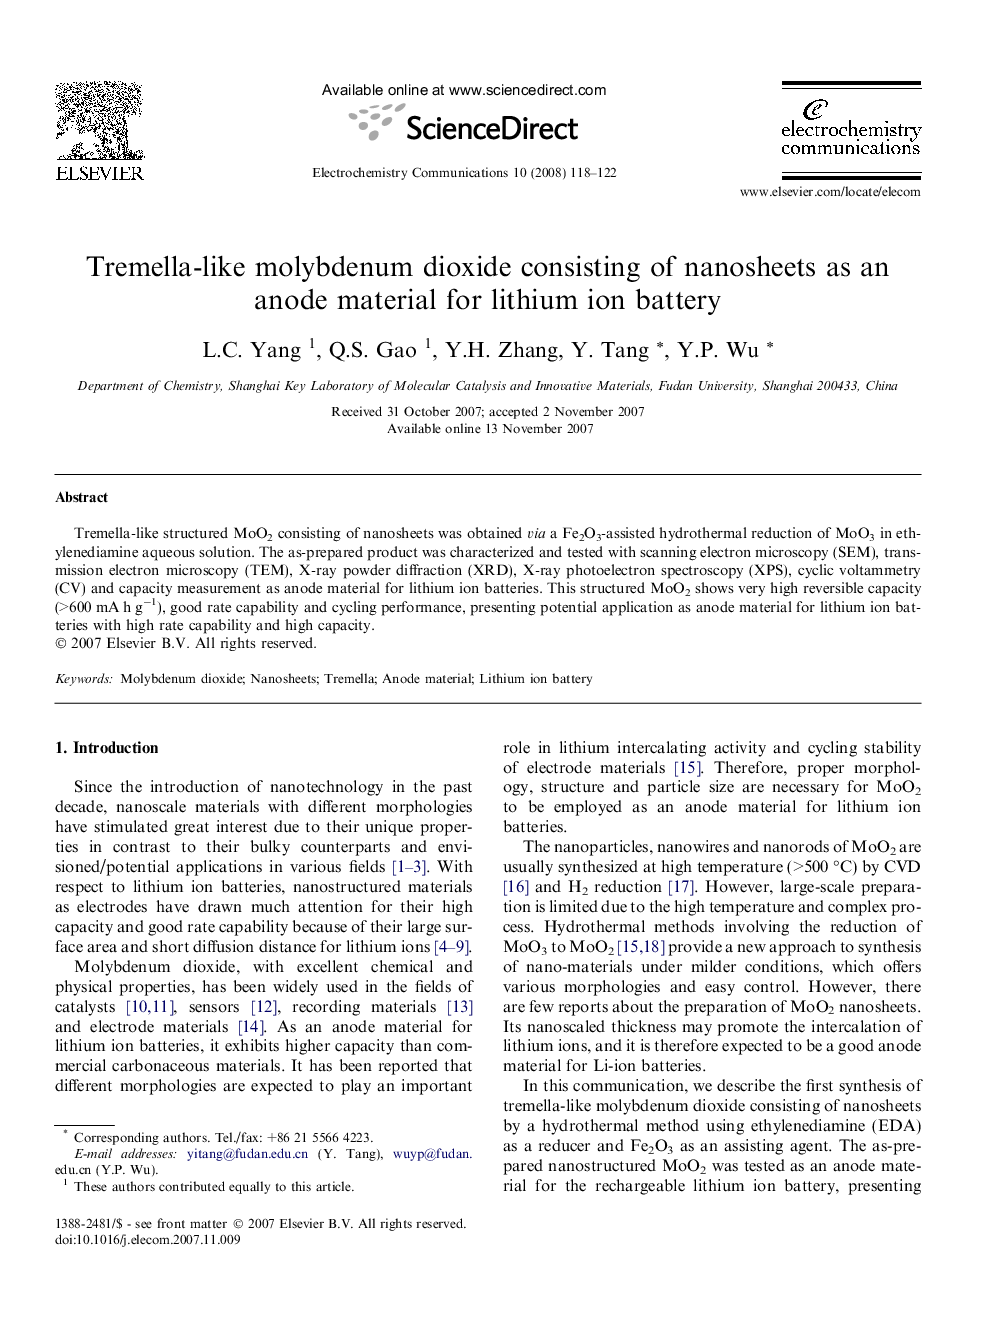 Tremella-like molybdenum dioxide consisting of nanosheets as an anode material for lithium ion battery